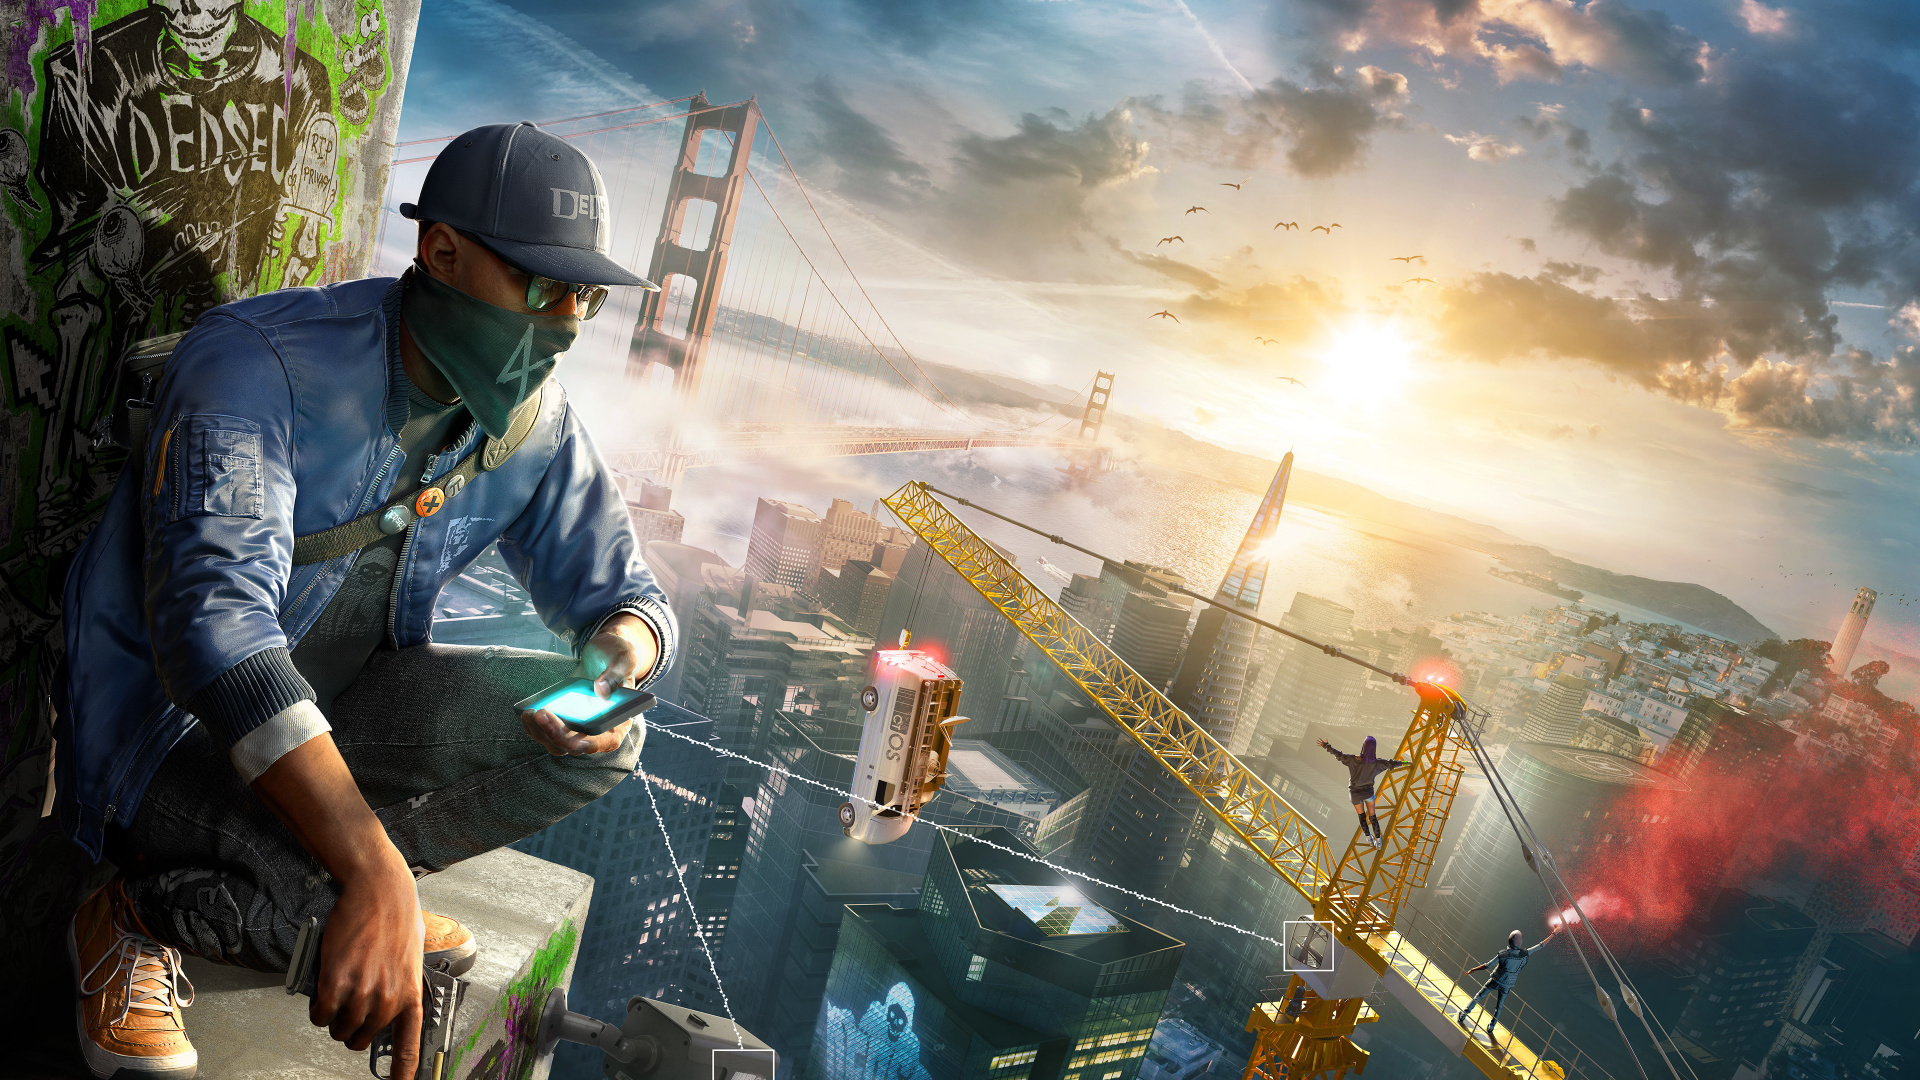 Watch Dogs 2, Watch Dogs, Ubisoft, Playstation 4, pc Game. Wallpaper in 1920x1080 Resolution